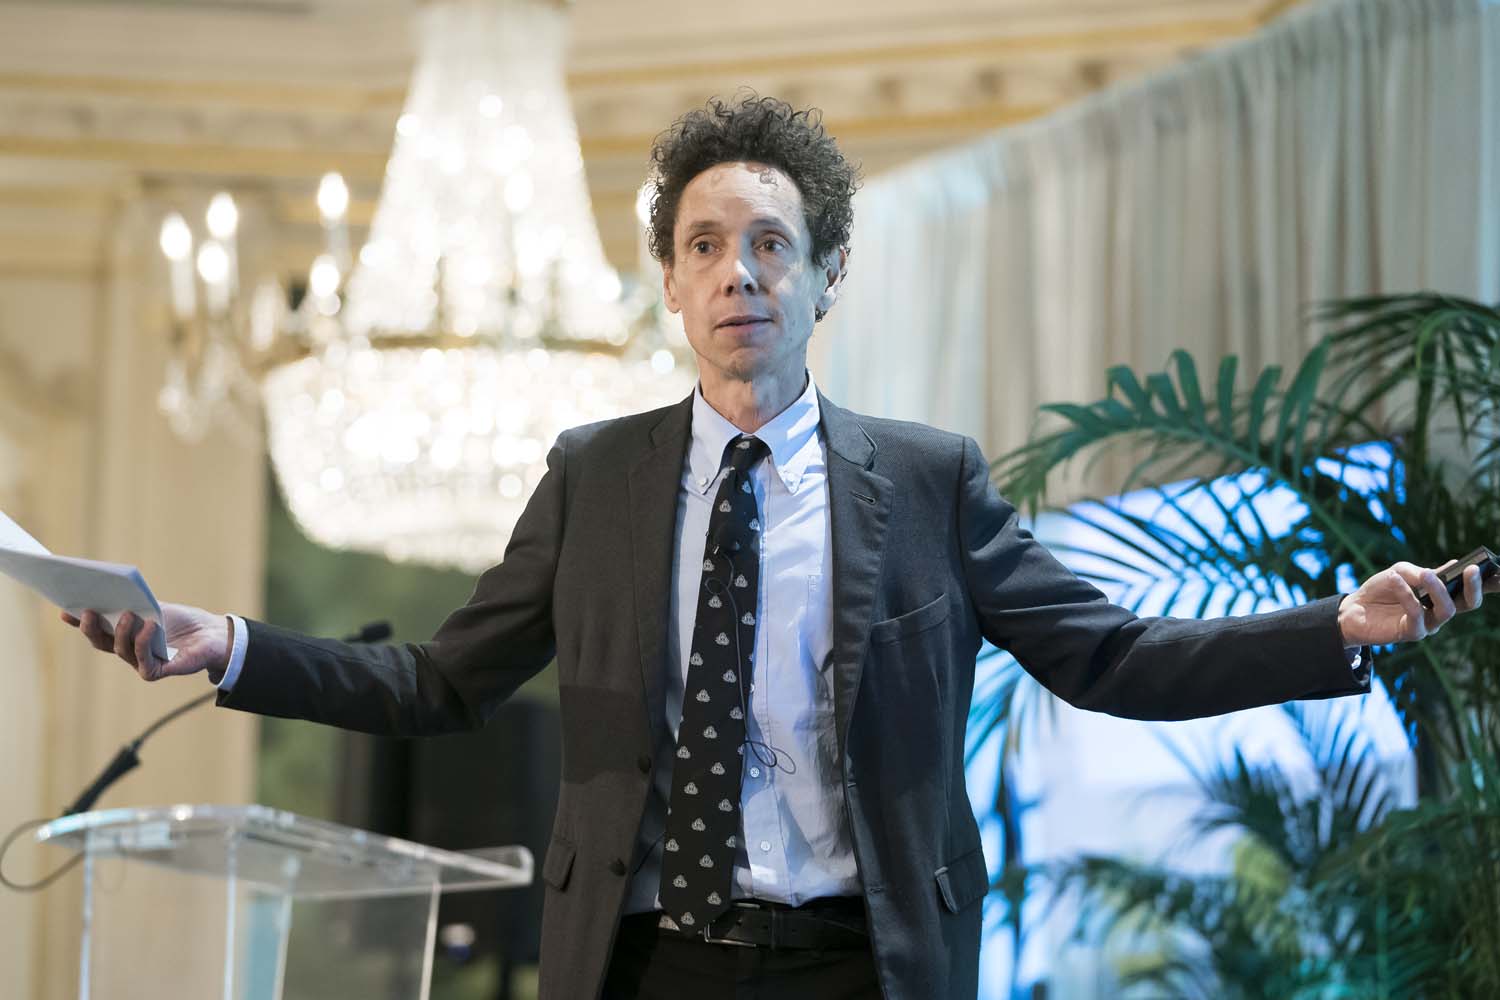 Author Malcolm Gladwell